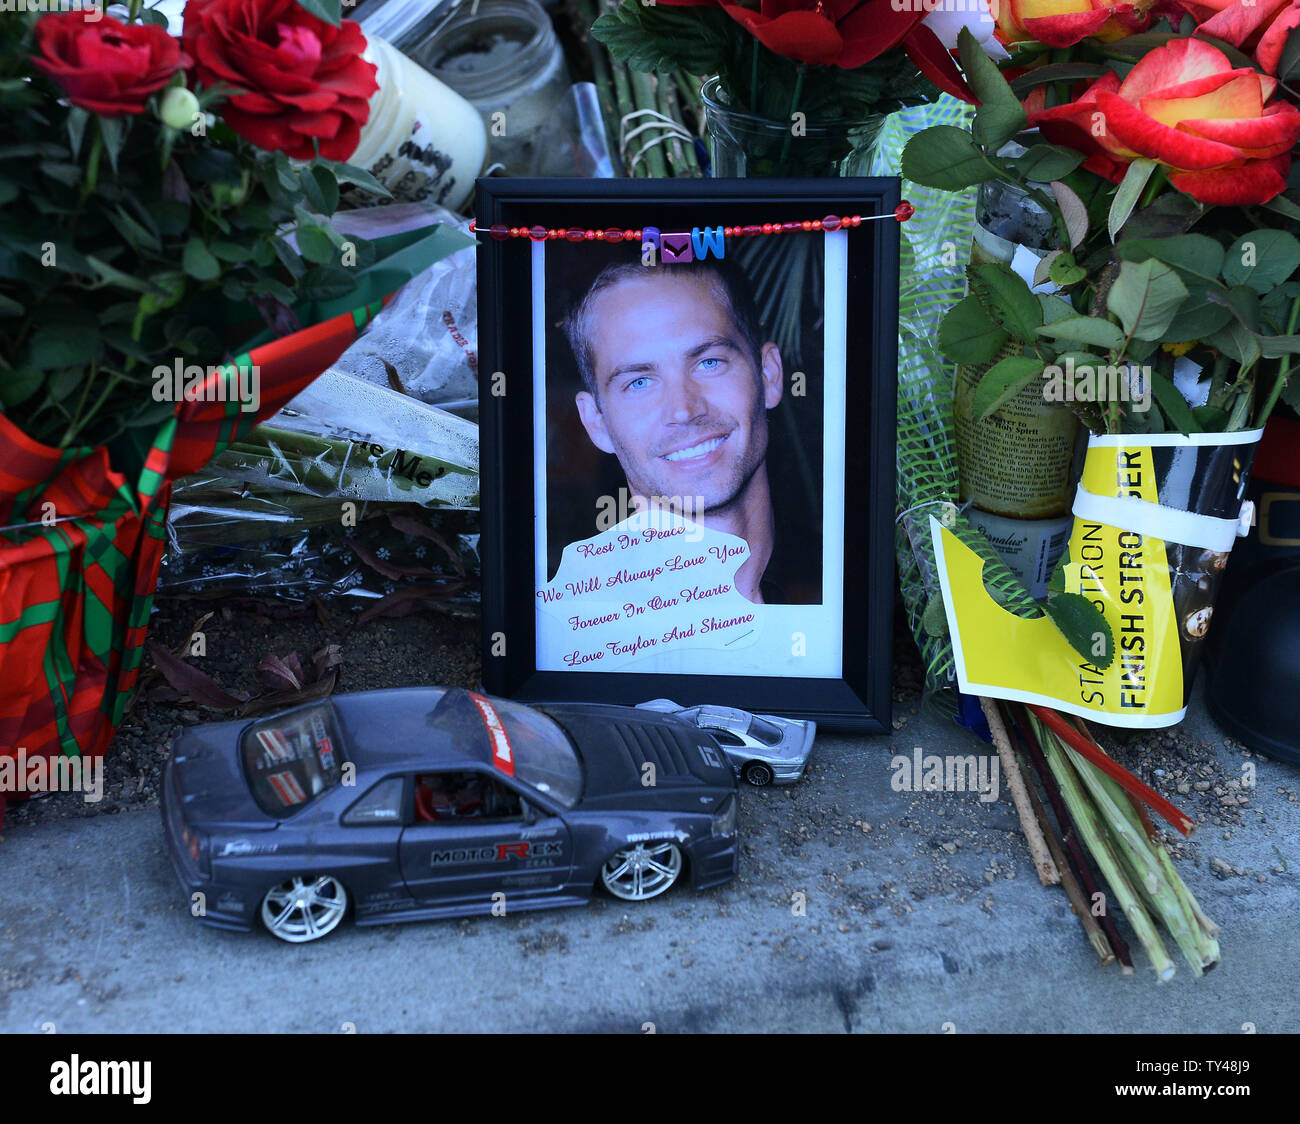 Fans gather at a makeshift memorial to pay respects at the site of the  fiery car accident in which actor Paul Walker was killed in Santa Clarita,  California, on December 4, 2013.